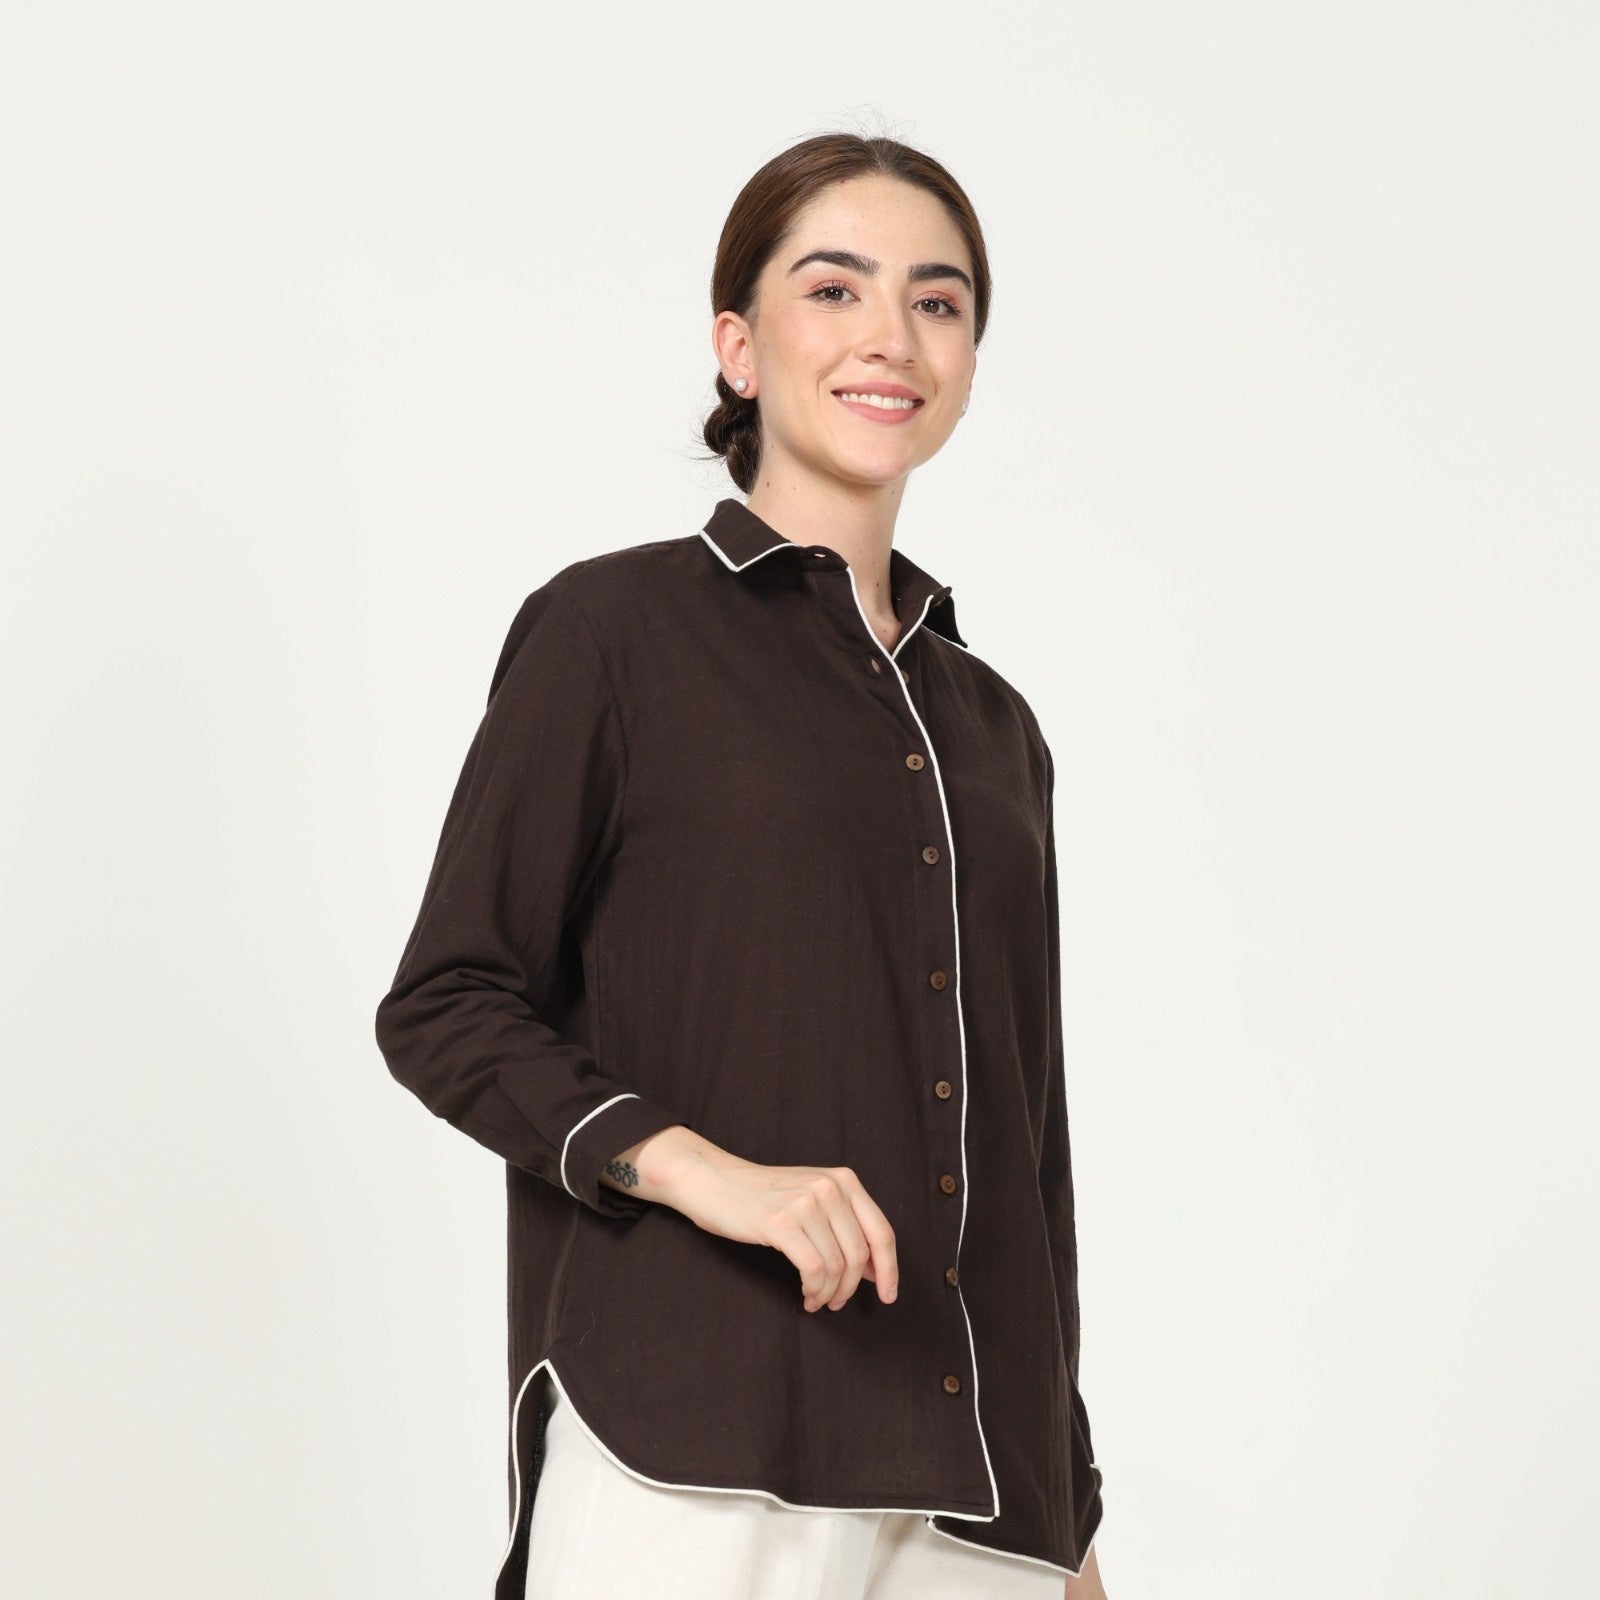 Jessica Shirt - Coffee Brown With Contrast Edging - Limited Edition